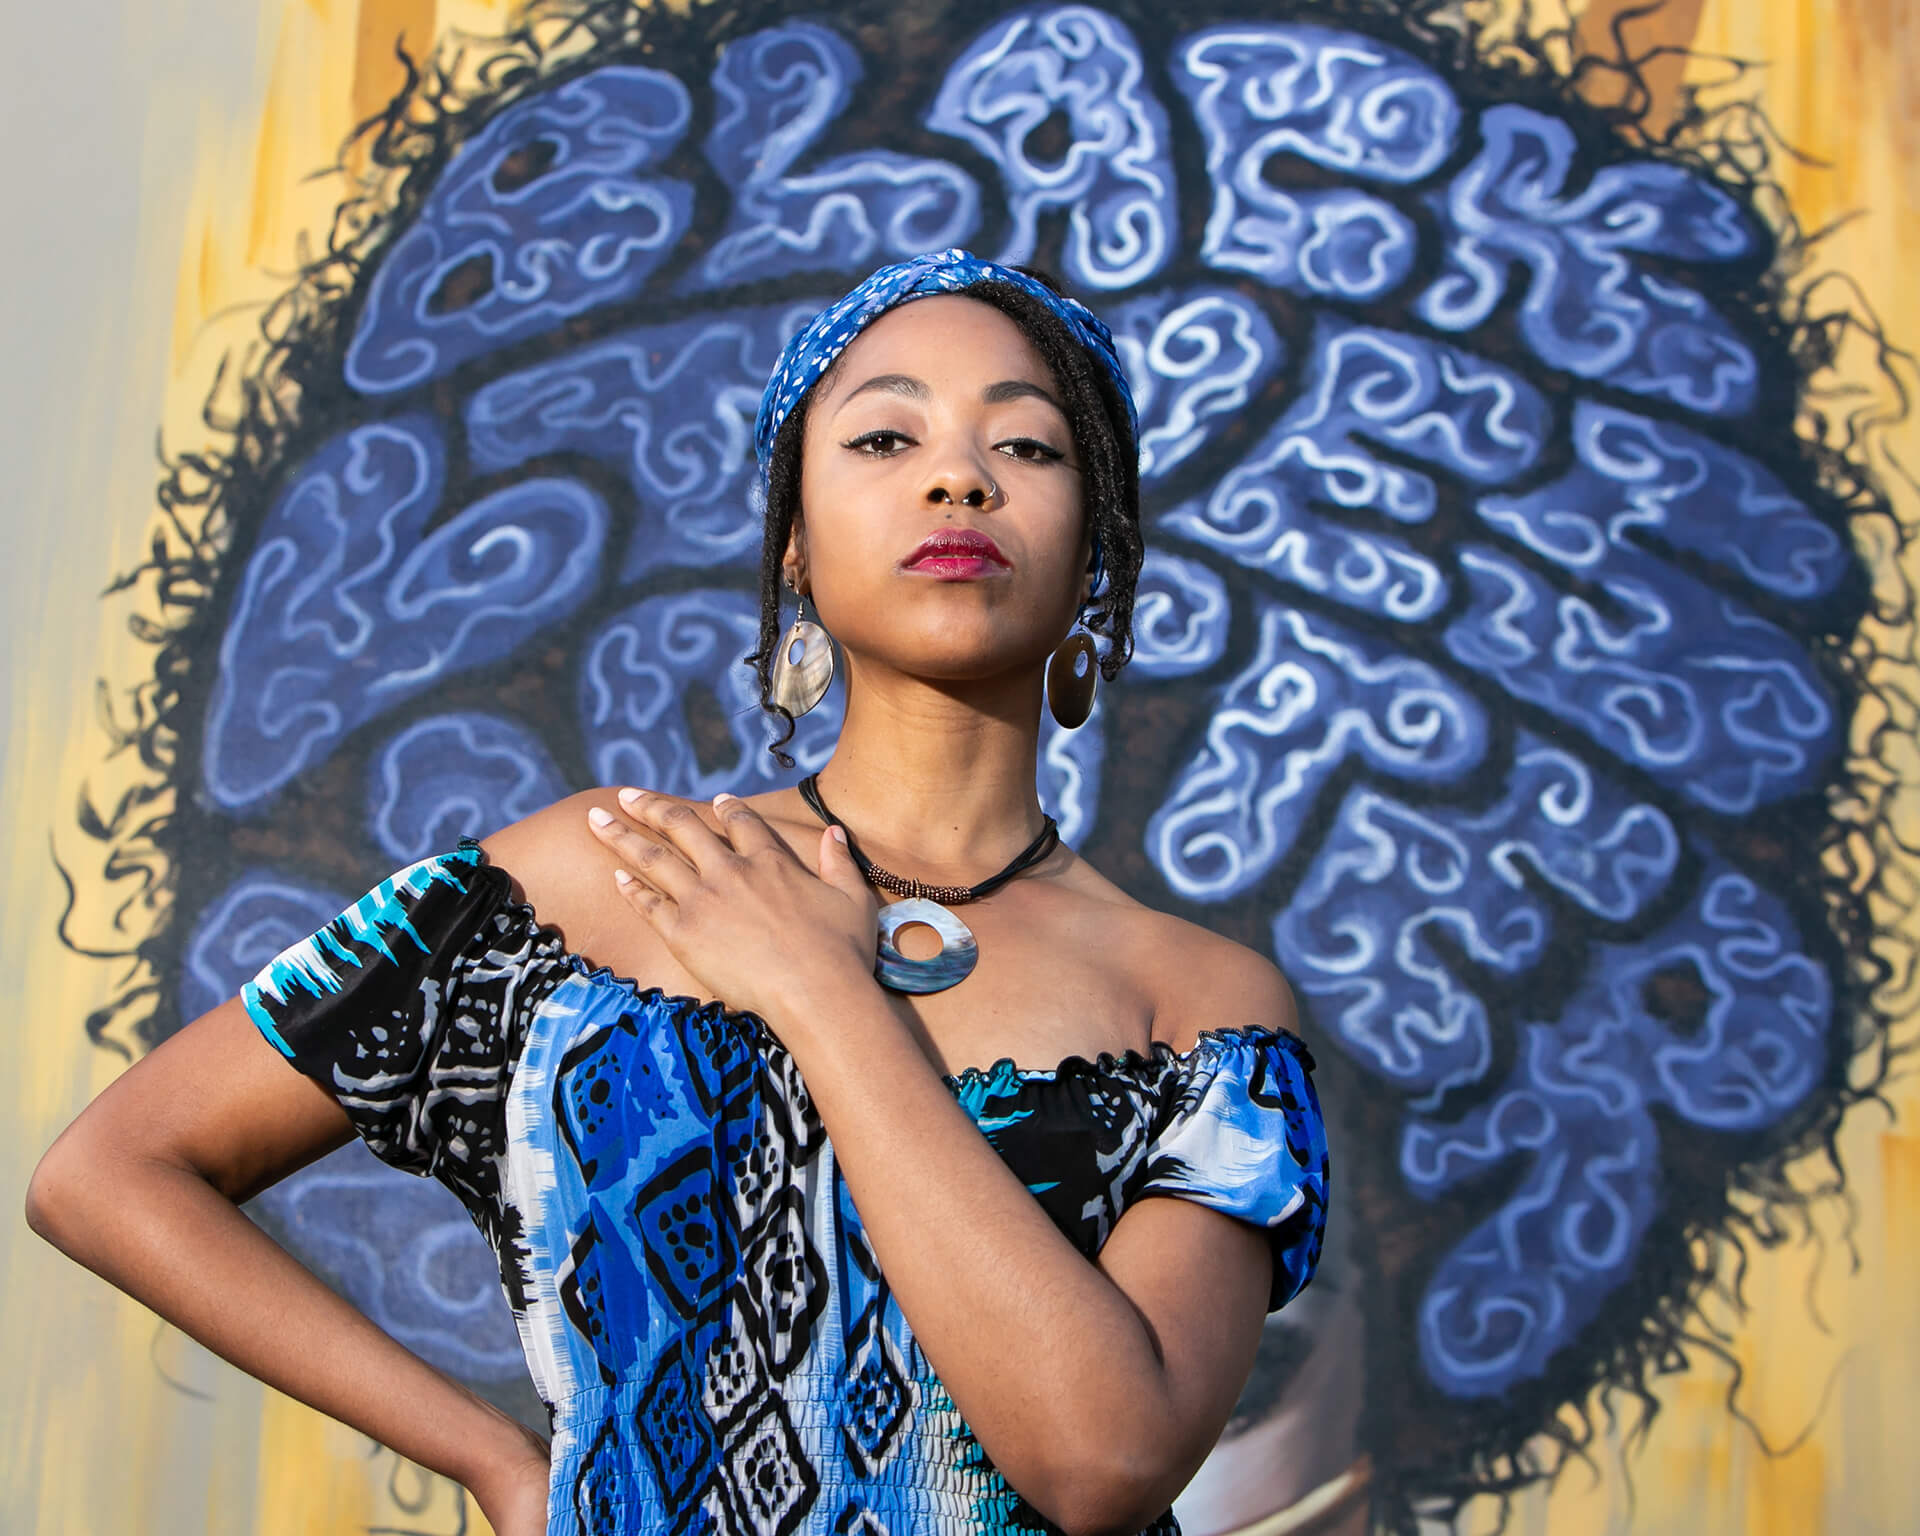 “My form of activism (or ARTivism) and giving back is about showing up when and where I can. Also, primarily through the Performing Arts & Education. Representation in these areas as a Black woman is essential. It not only shows that we are here too, but it gives us voice and the opportunity to shift the culture in new and necessary ways.” – Chezale